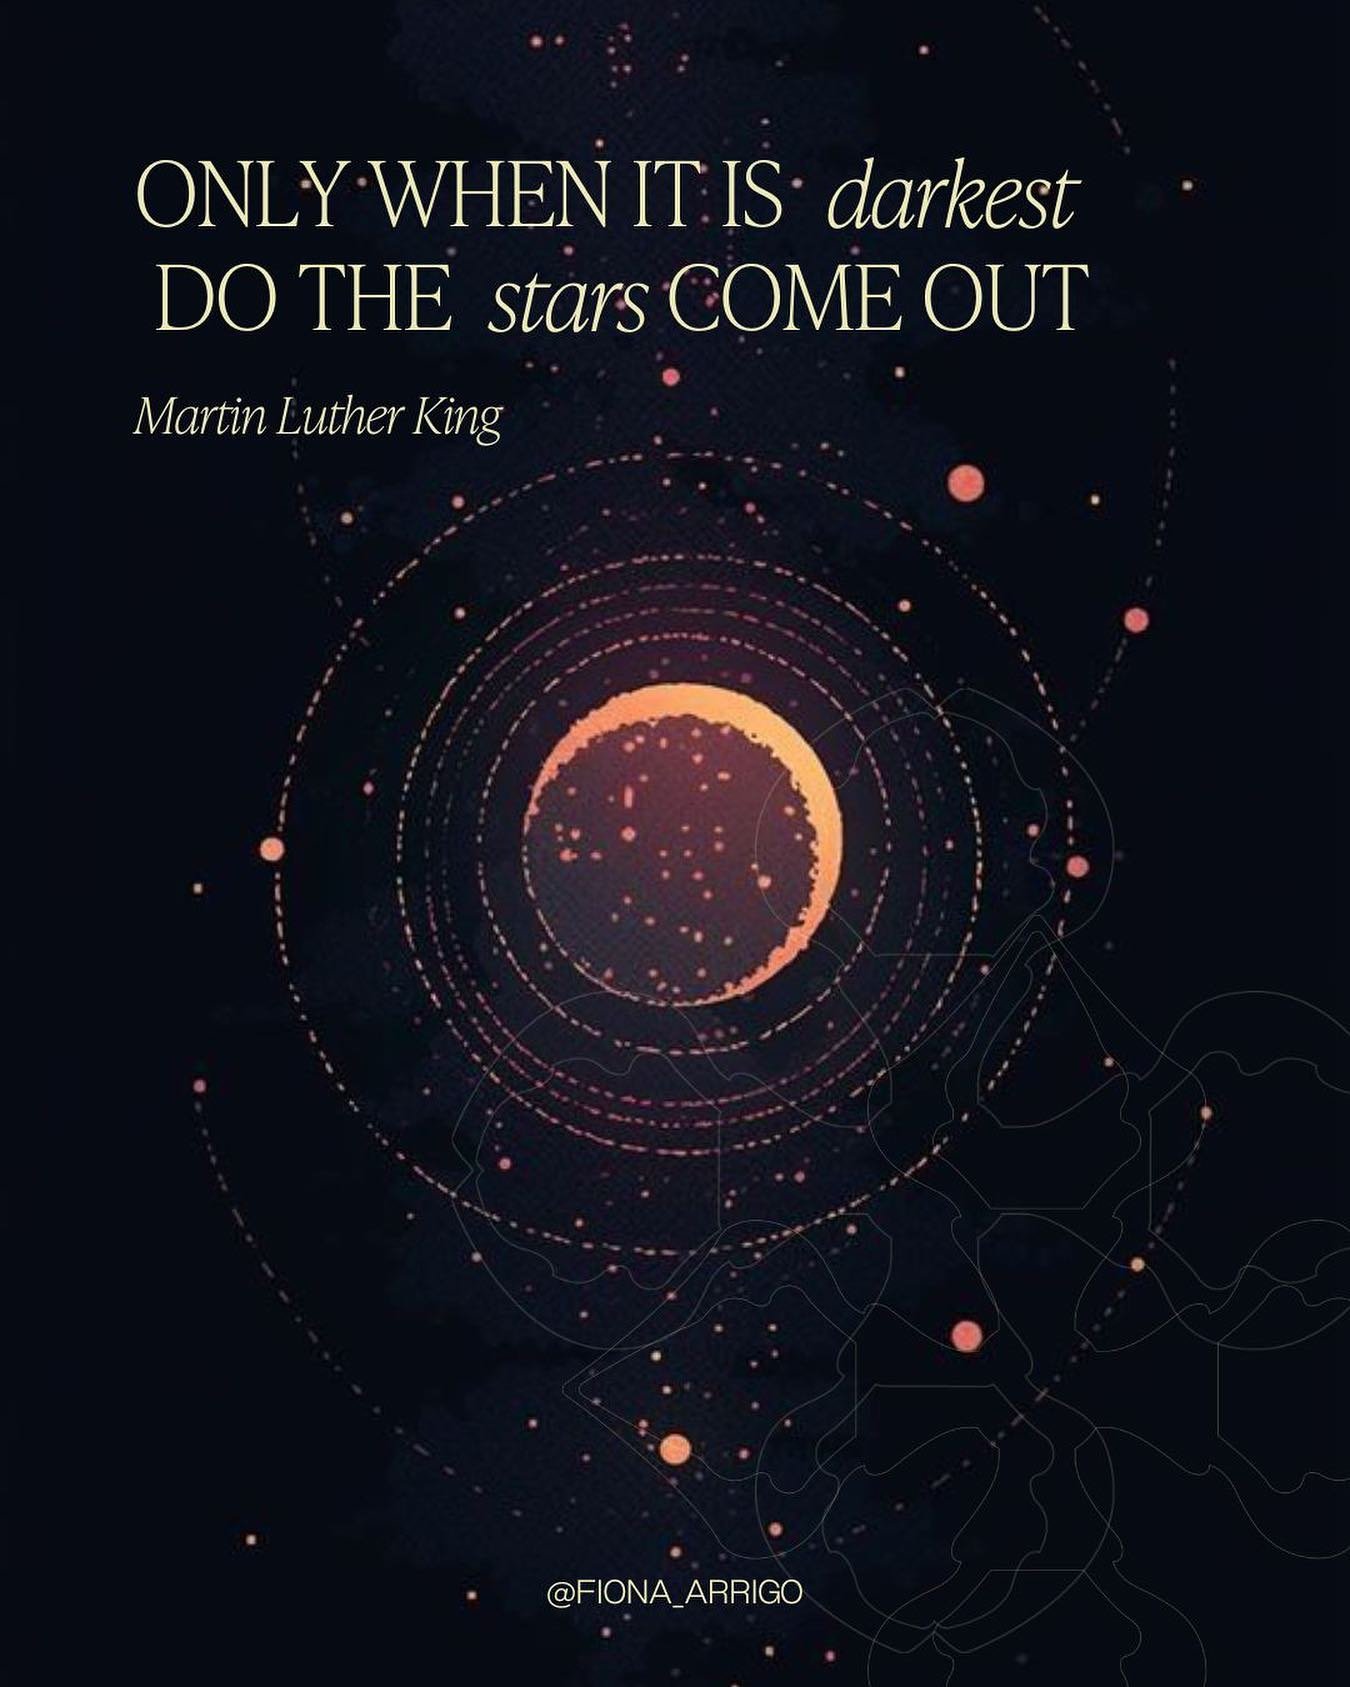 &ldquo;Only when it is darkest do the stars come out.&rdquo; &mdash; Martin Luther King

In life, it&rsquo;s often during our most challenging moments that we discover our true strength and resilience. 
Darkness isn&rsquo;t the end; it&rsquo;s an opp